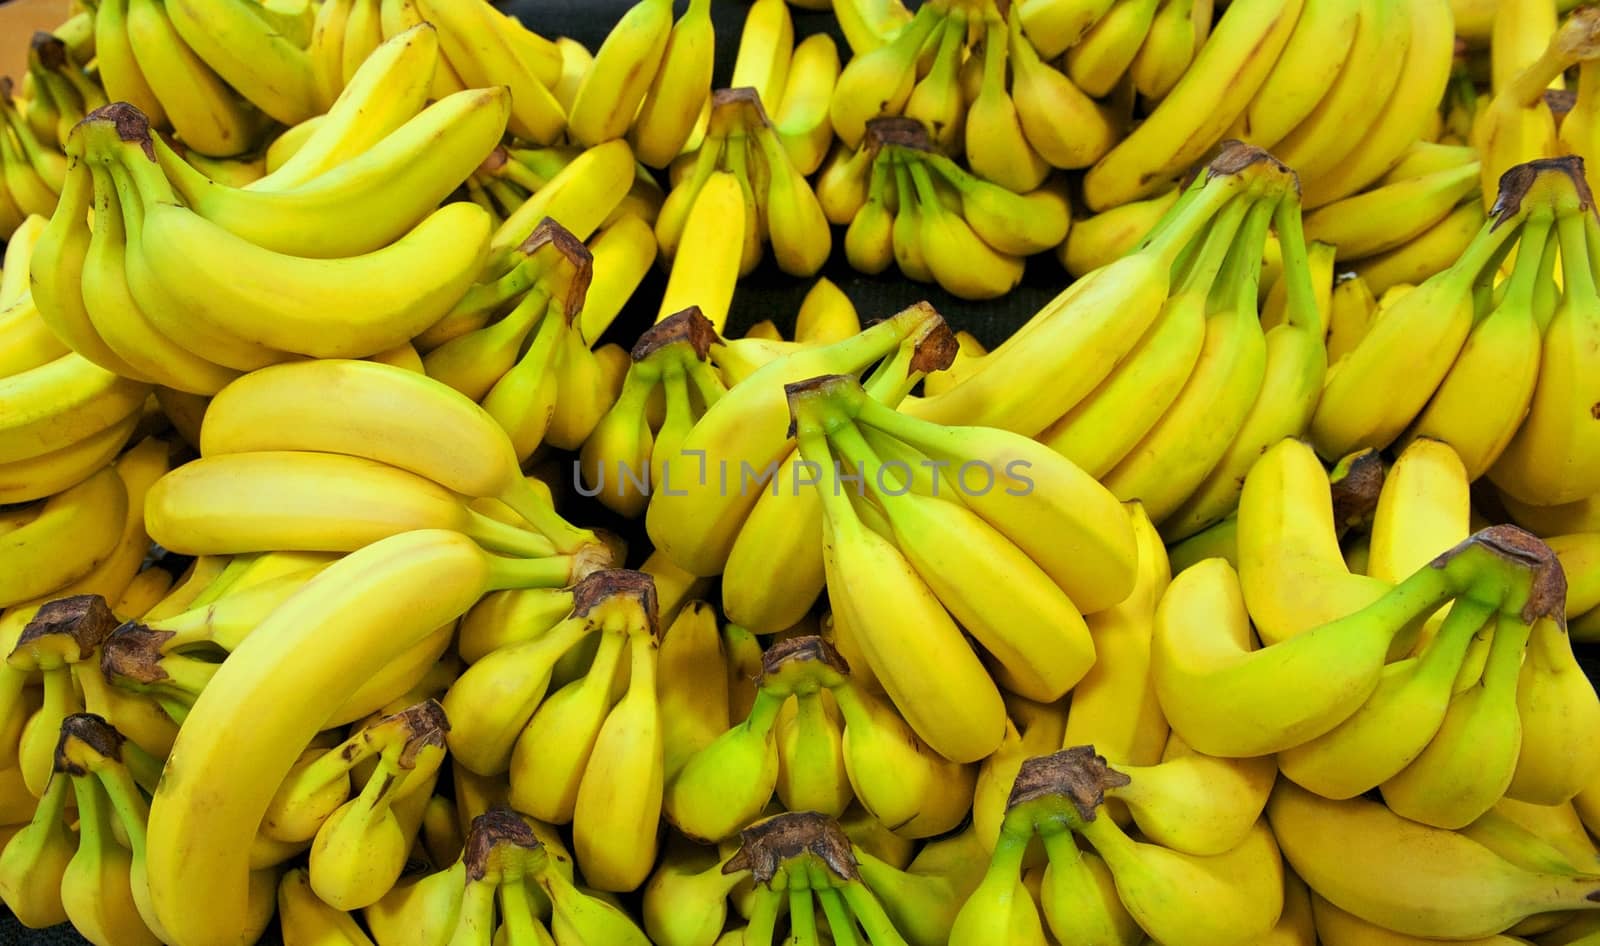 Pile of Yellow and Green Bananas in a Grocery Store Setting by pixelsnap